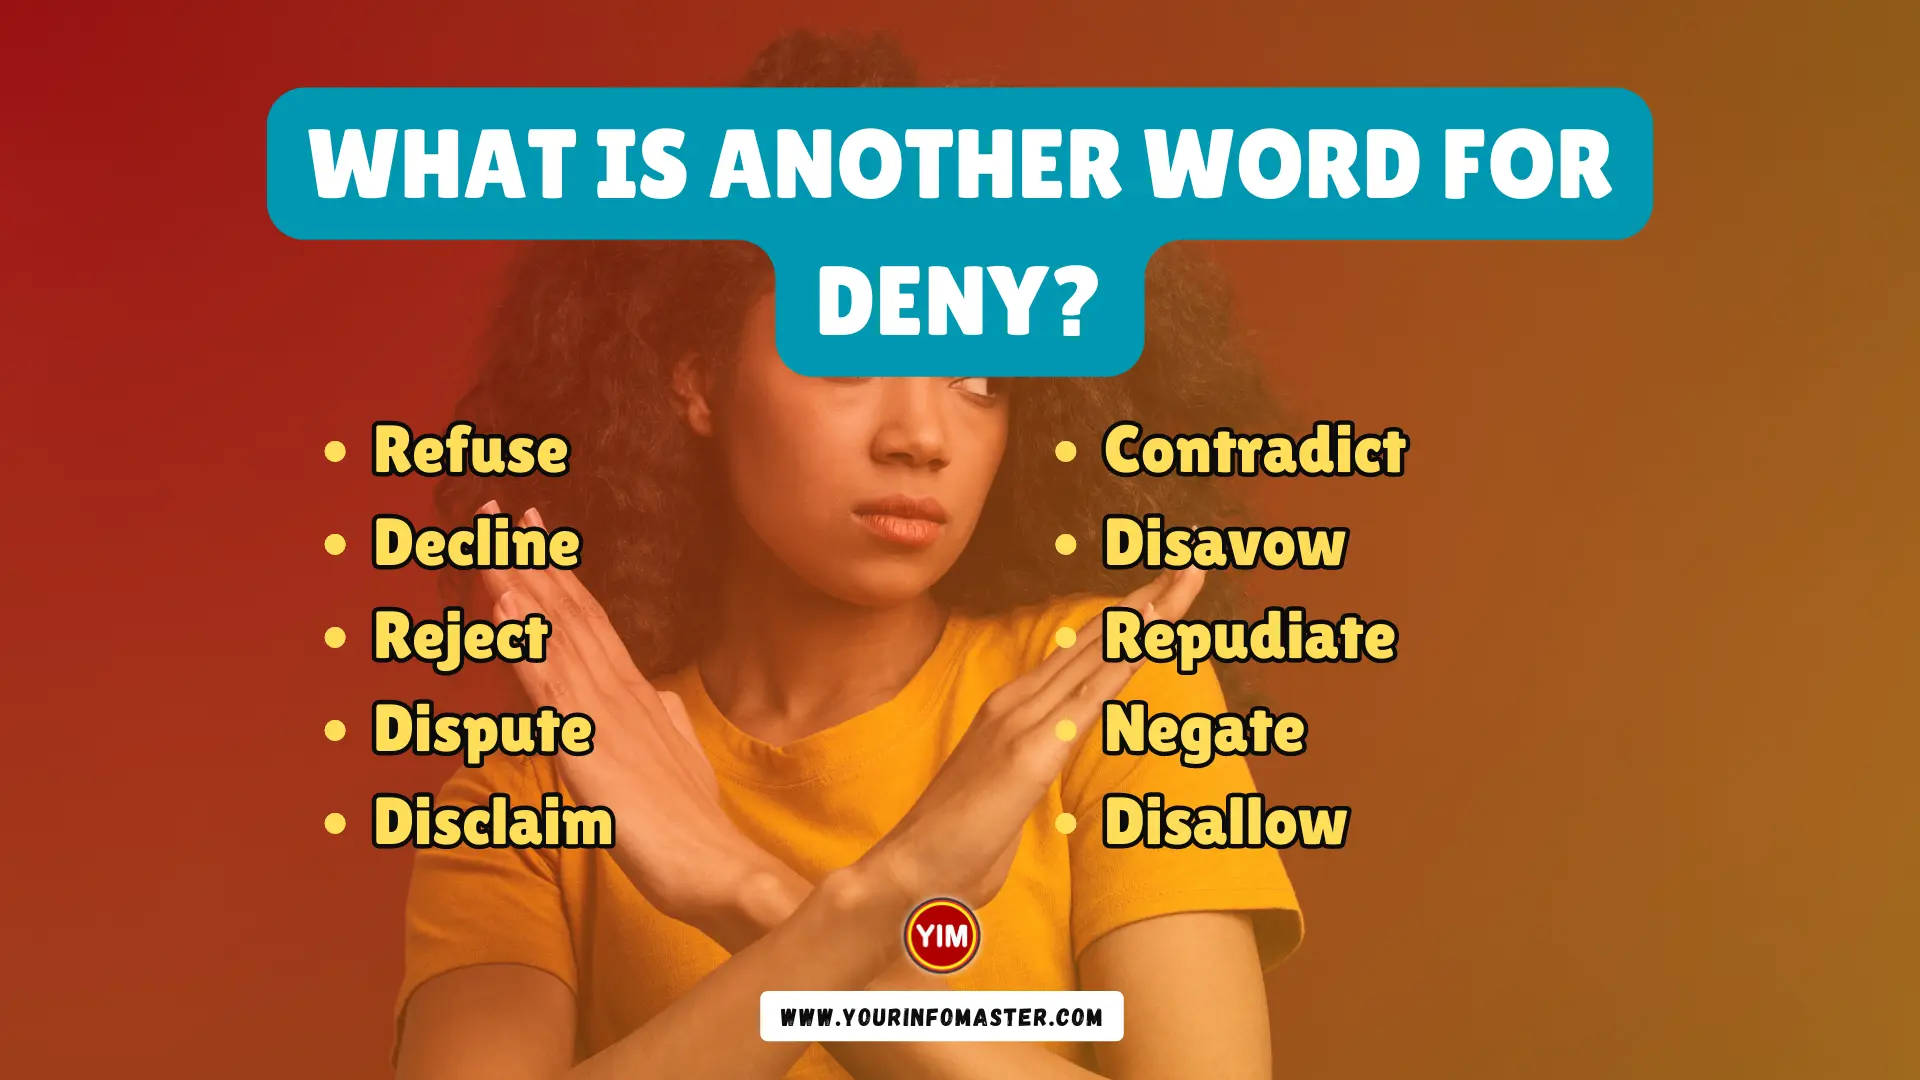 What is another word for Deny